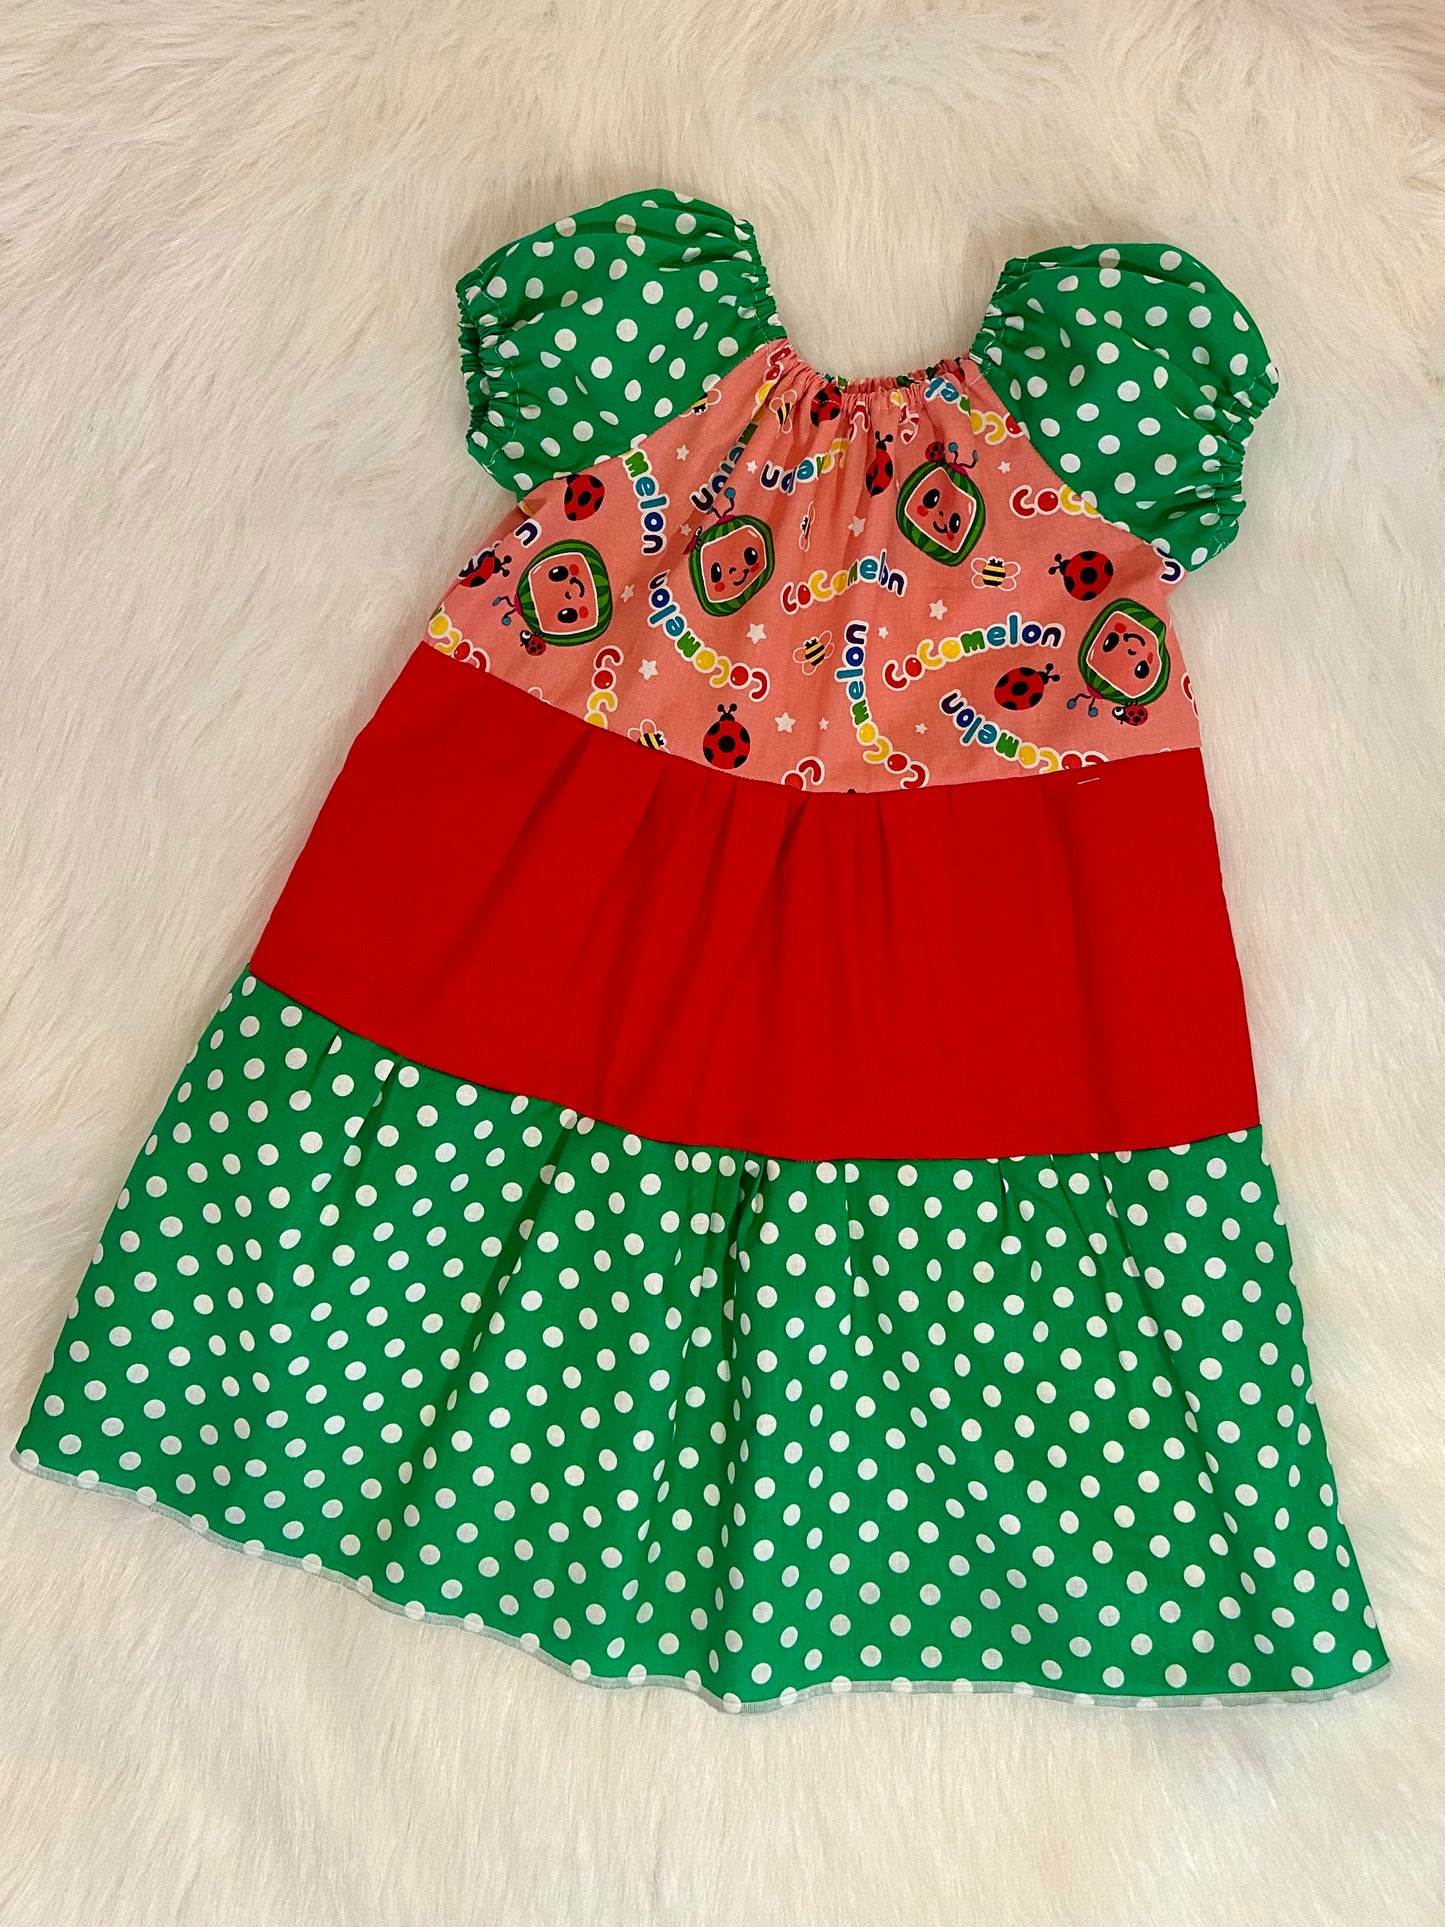 Teired Peasant Dress - melon baby - size